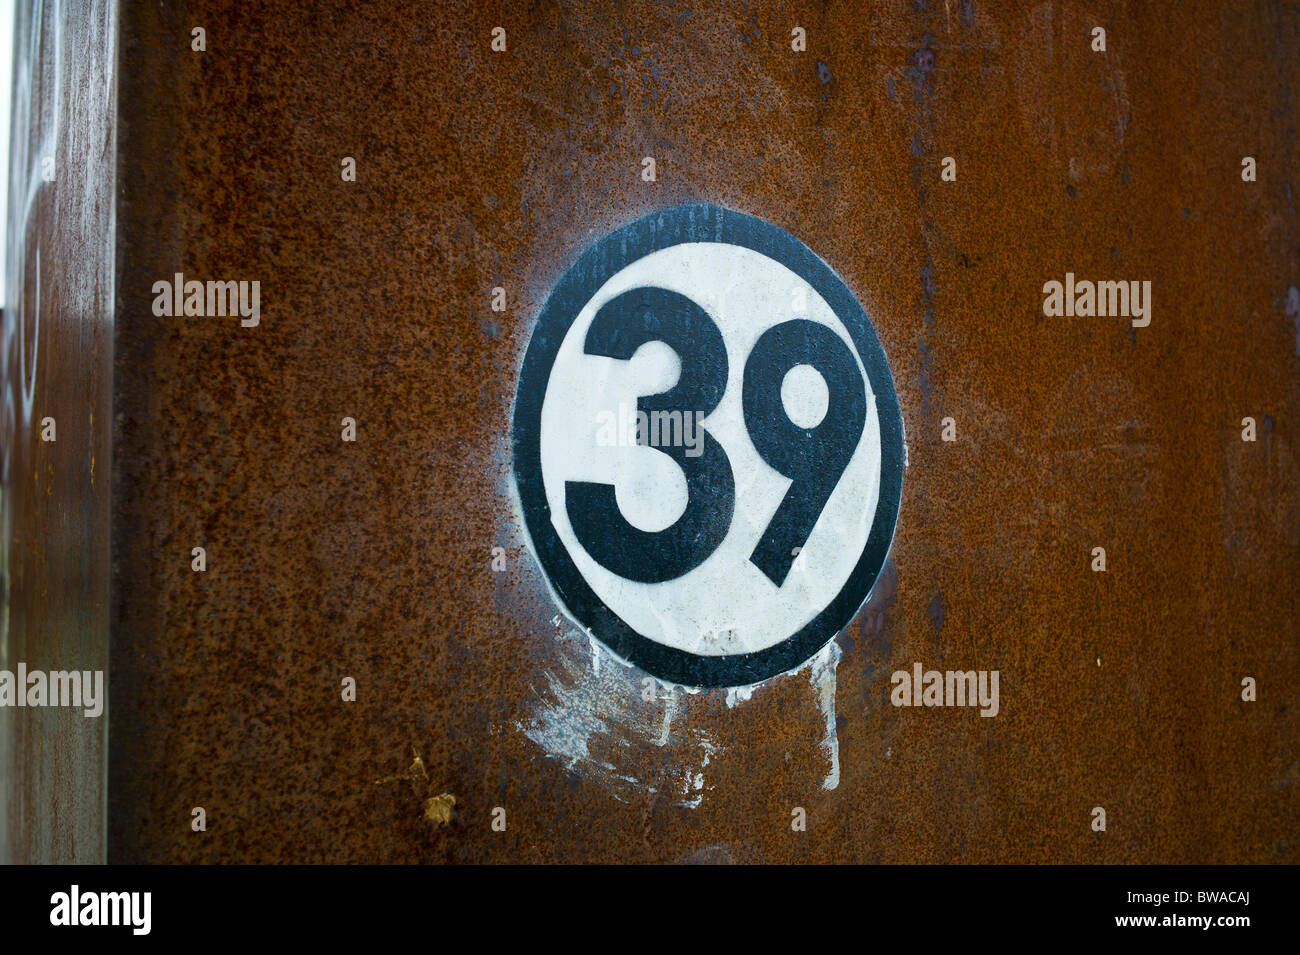 Black number 39 on white background within a black circle spray painted on rusty steel, Berlin, Gernany Stock Photo